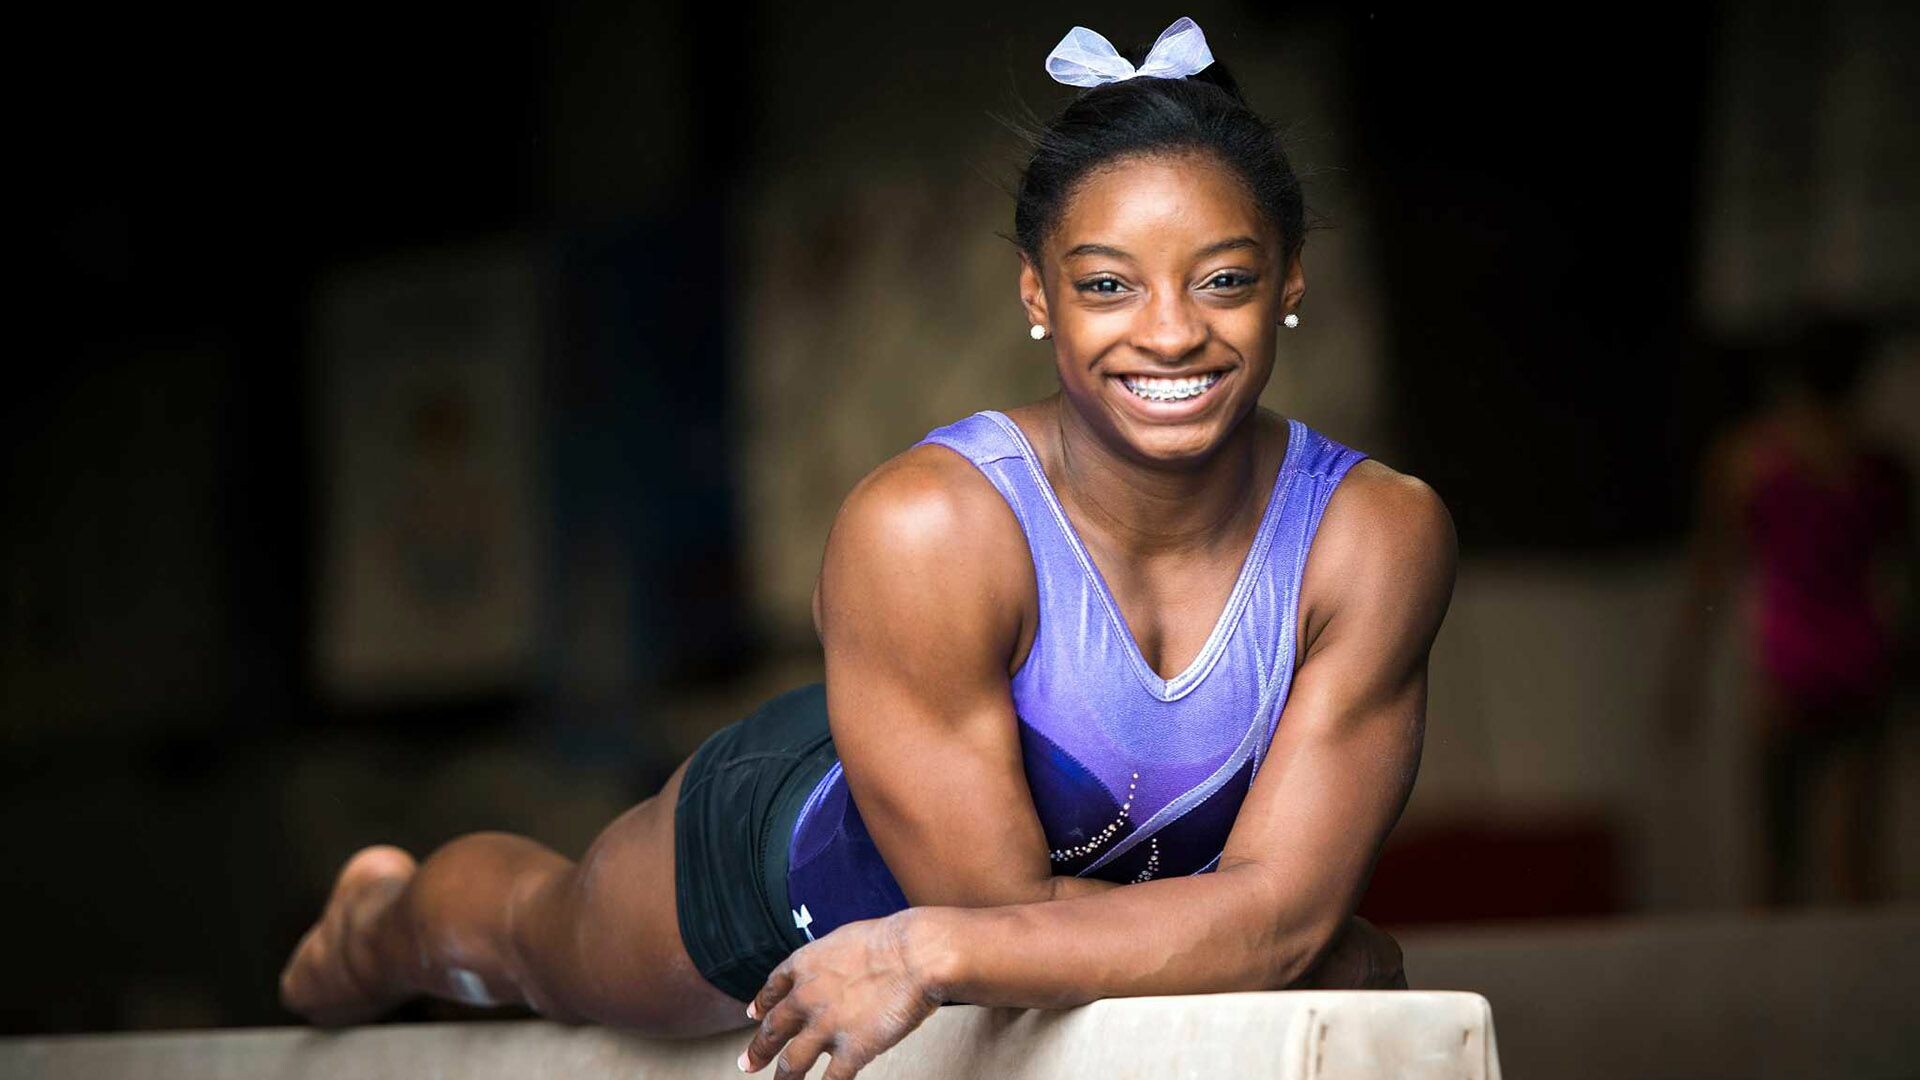 Simone Biles: She set an American record for most gold medals in women's gymnastics at a single Games in 2016. 1920x1080 Full HD Background.